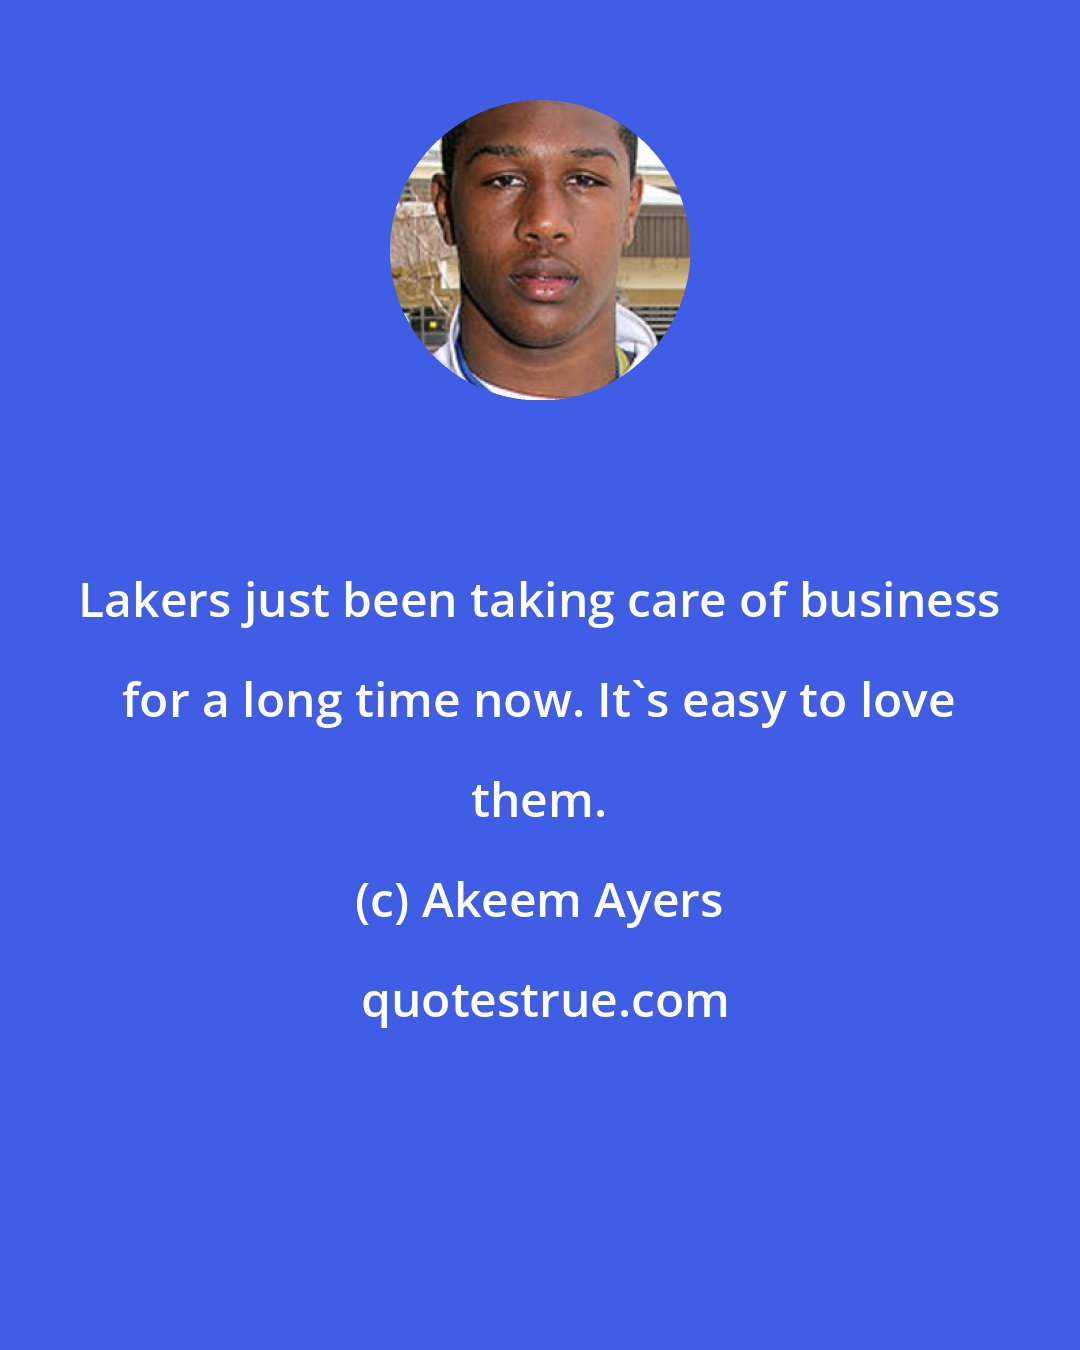 Akeem Ayers: Lakers just been taking care of business for a long time now. It's easy to love them.